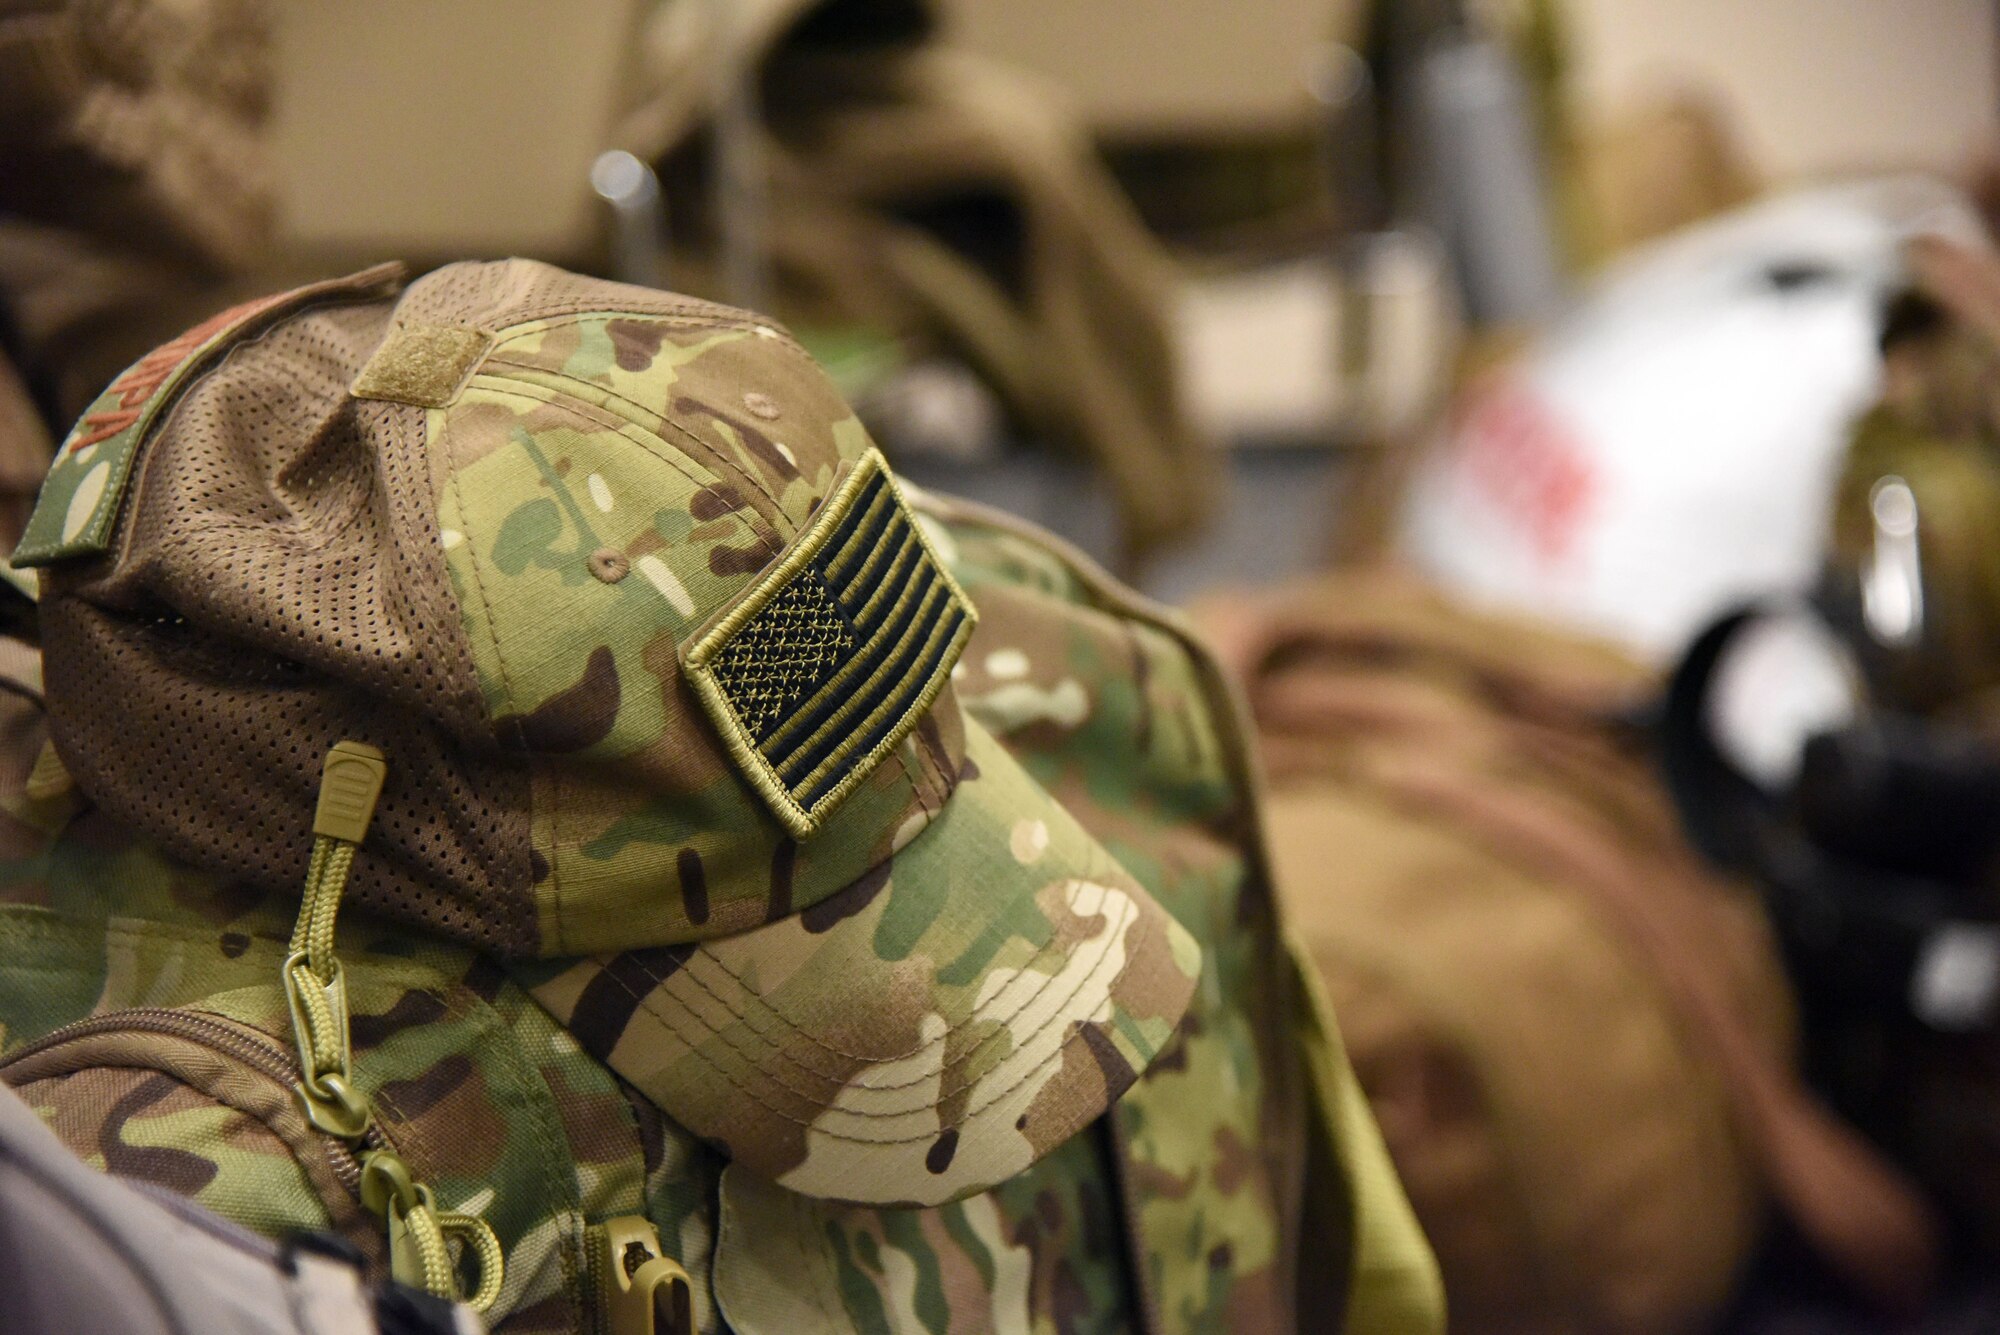 An Air Force deployment hat rests on luggage as Keesler personnel in process for deployment at the Roberts Consolidated Aircraft Maintenance Facility Jan. 8, 2018, on Keesler Air Force Base, Mississippi. Members of the 403rd Wing make preparations for an upcoming deployment to an undisclosed location. (U.S. Air Force photo by Kemberly Groue)